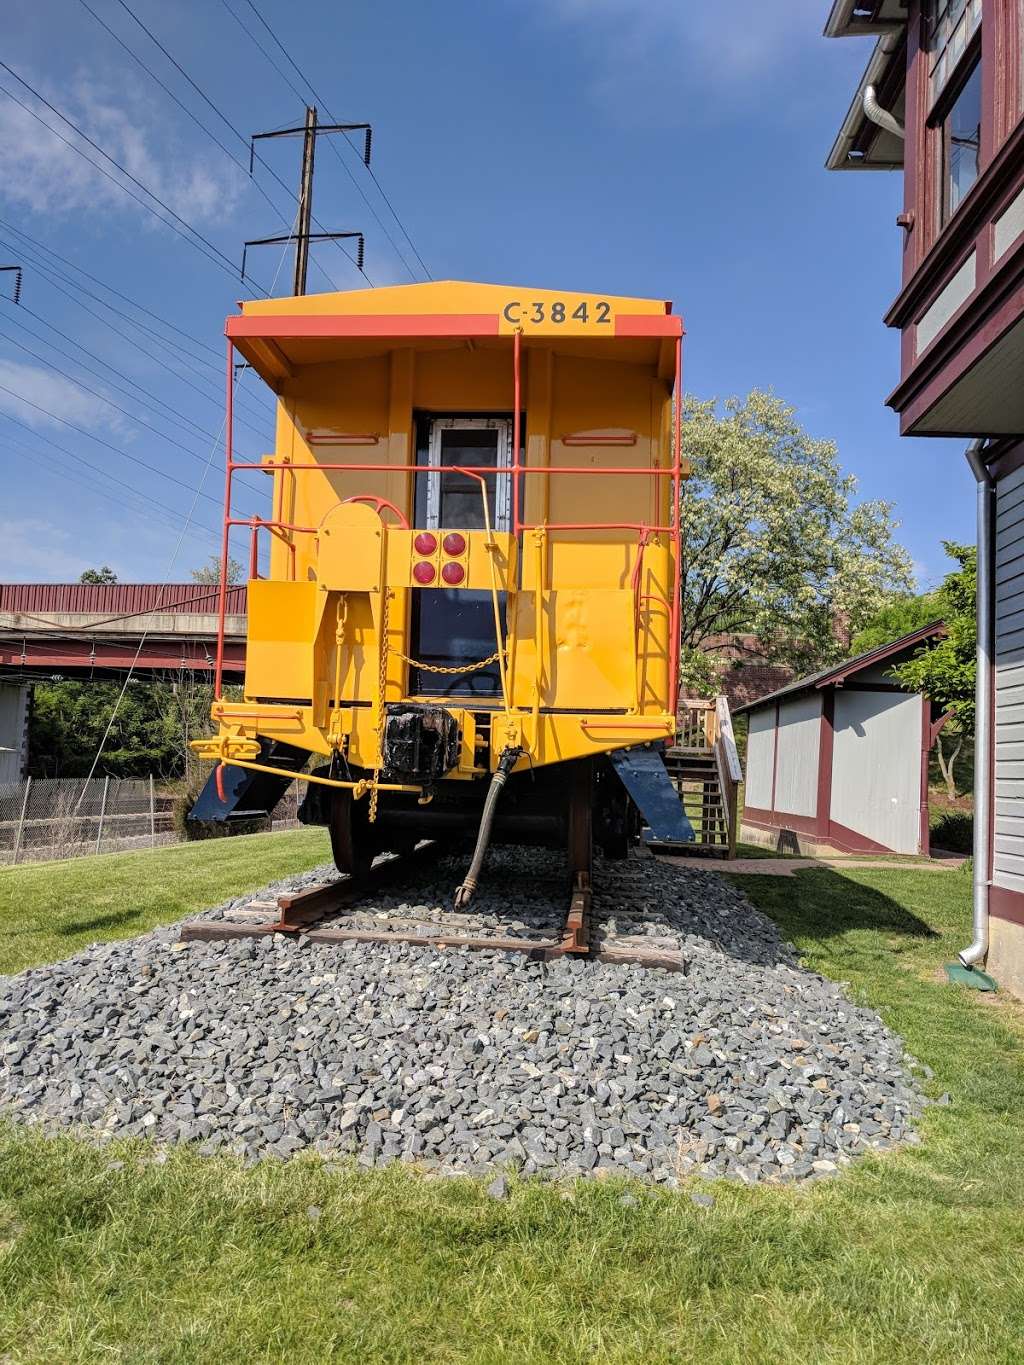 Bowie Railroad Museum | 8614 Chestnut Ave, Bowie, MD 20715 | Phone: (301) 809-3089